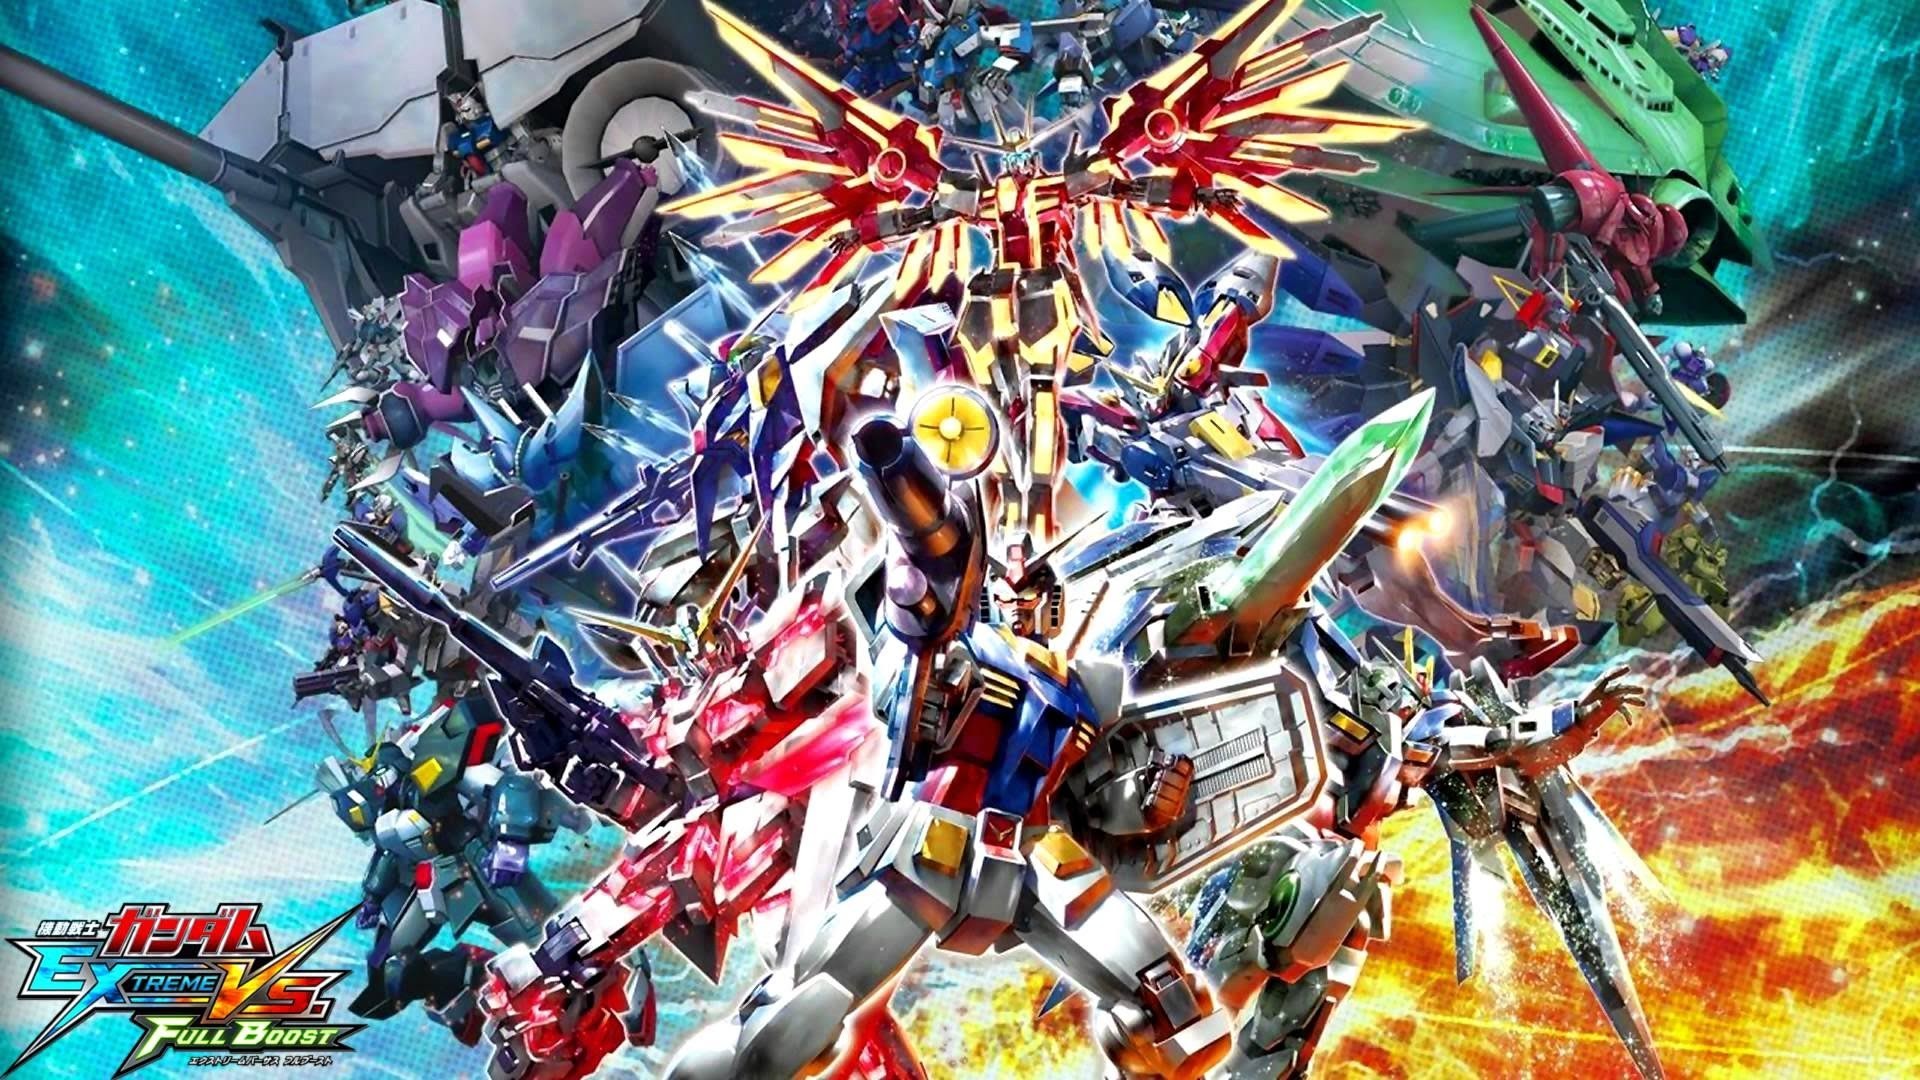 Gundam Wallpaper For Desktop with high-resolution 1920x1080 pixel. You can use this wallpaper for your Windows and Mac OS computers as well as your Android and iPhone smartphones